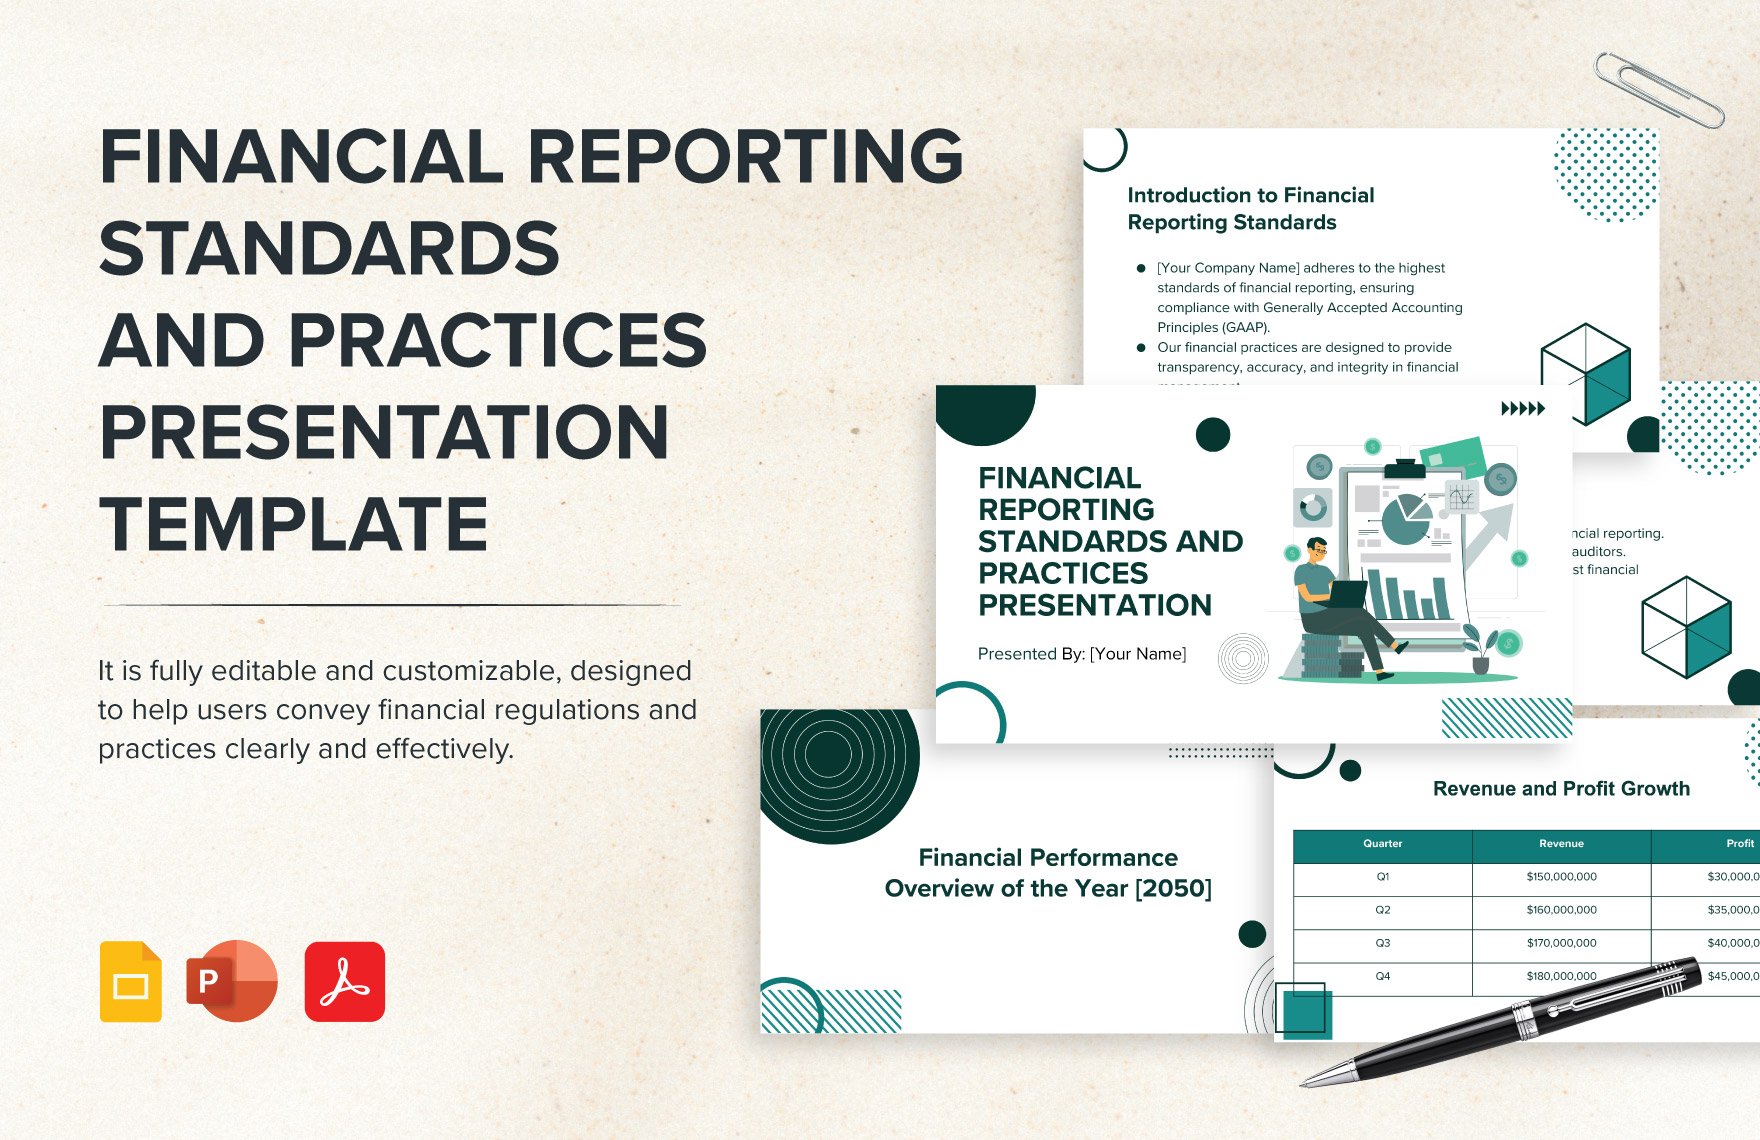 Free Financial Reporting Standards and Practices Presentation Template